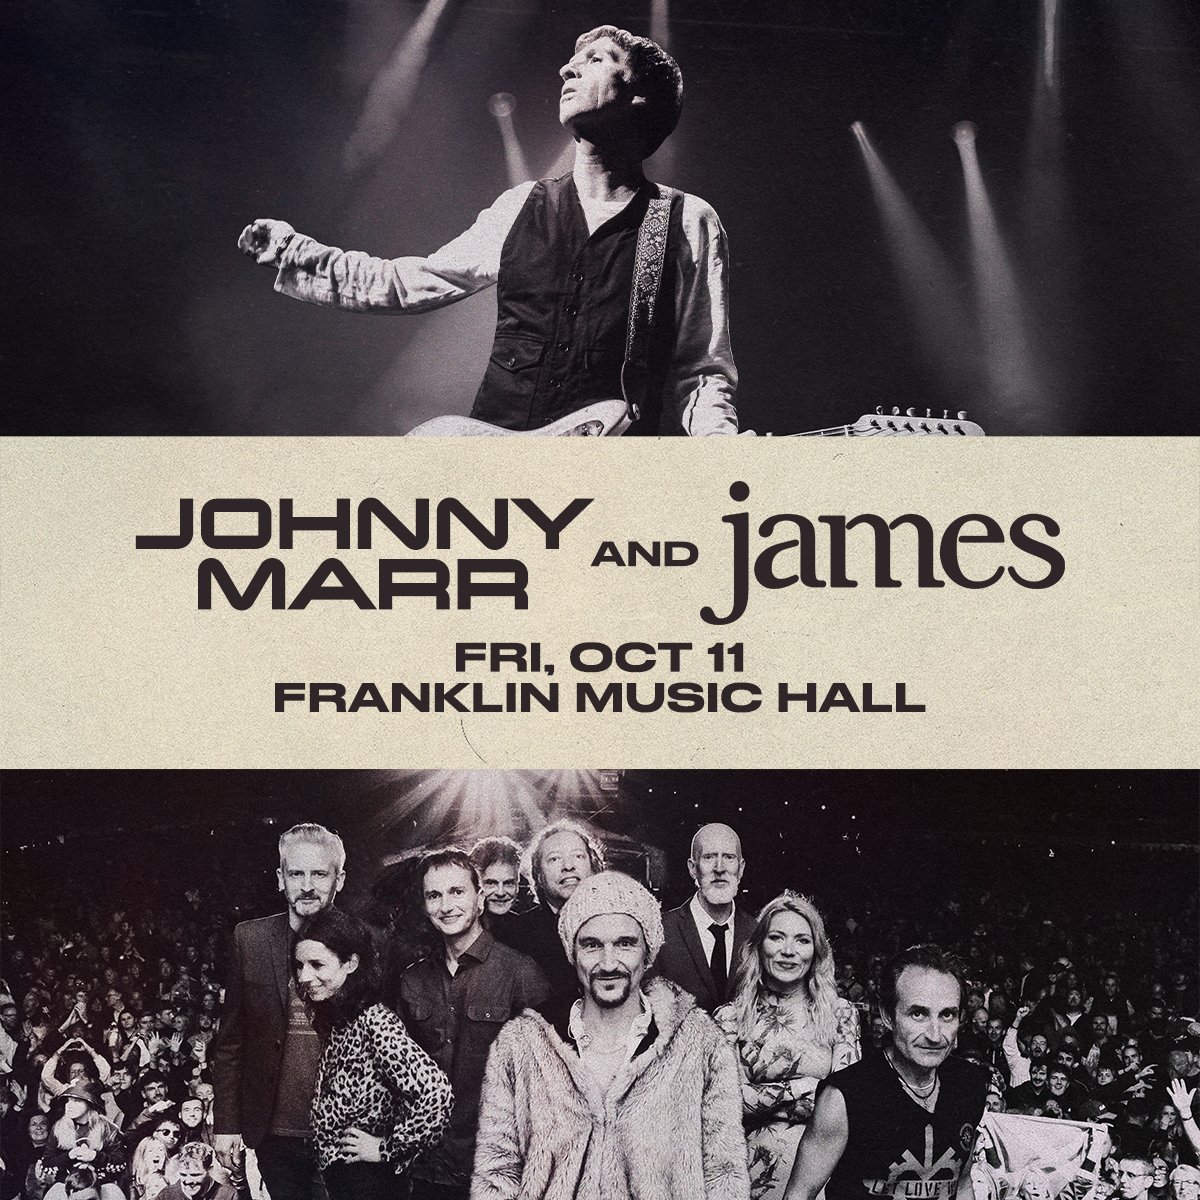 Thrilled to announce @Johnny_Marr & @wearejames will share the stage on Friday, October 11th! Tickets go on sale this Friday at 10am.